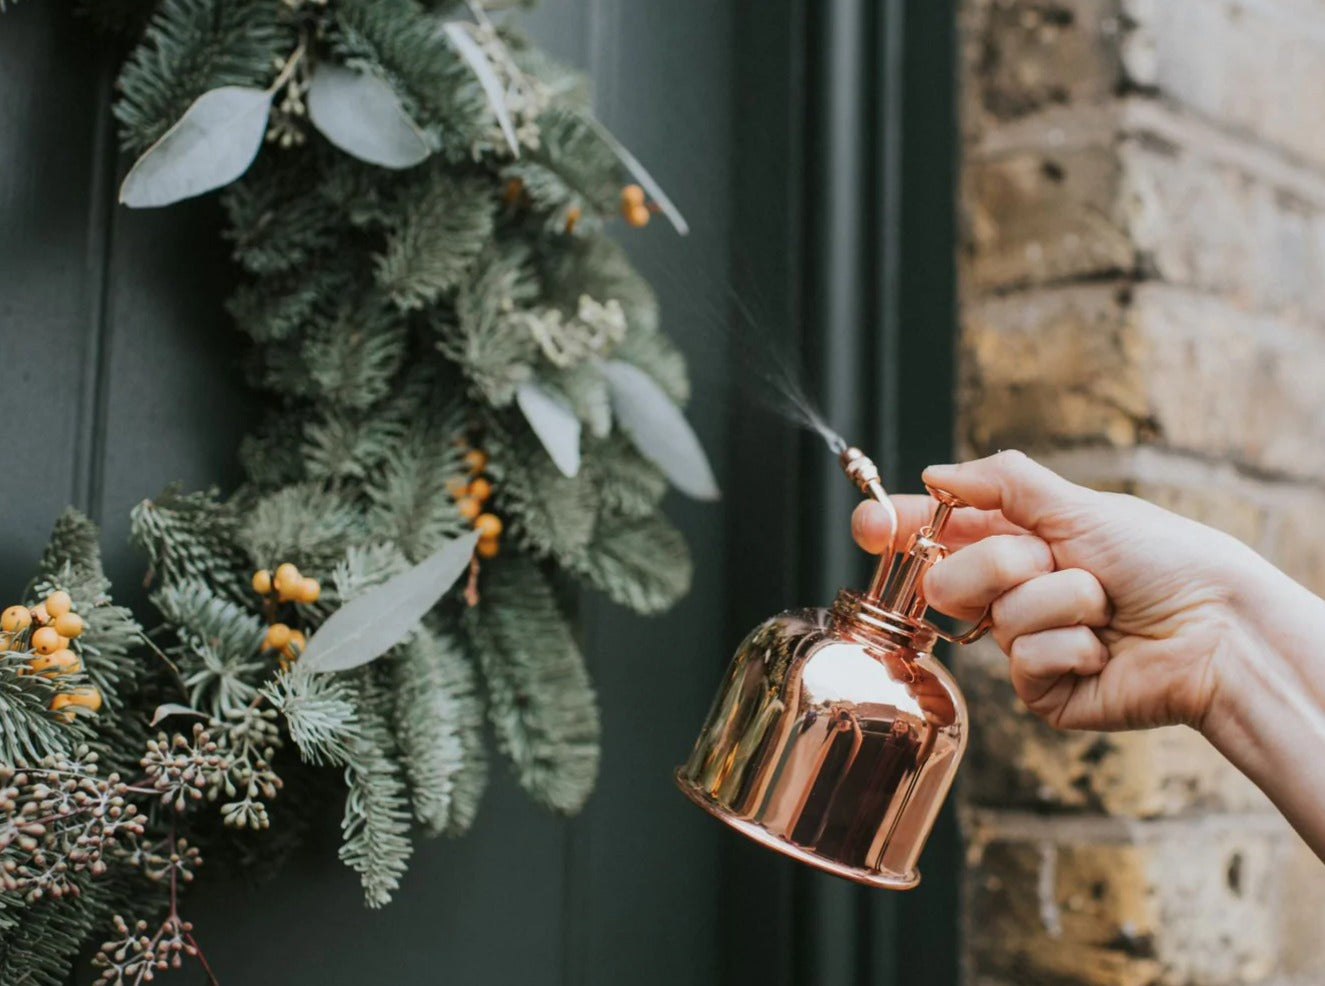 The Smethwick Spritzer Copper - Half Pint - The Bristol Artisan Handmade Sustainable Gifts and Homewares.